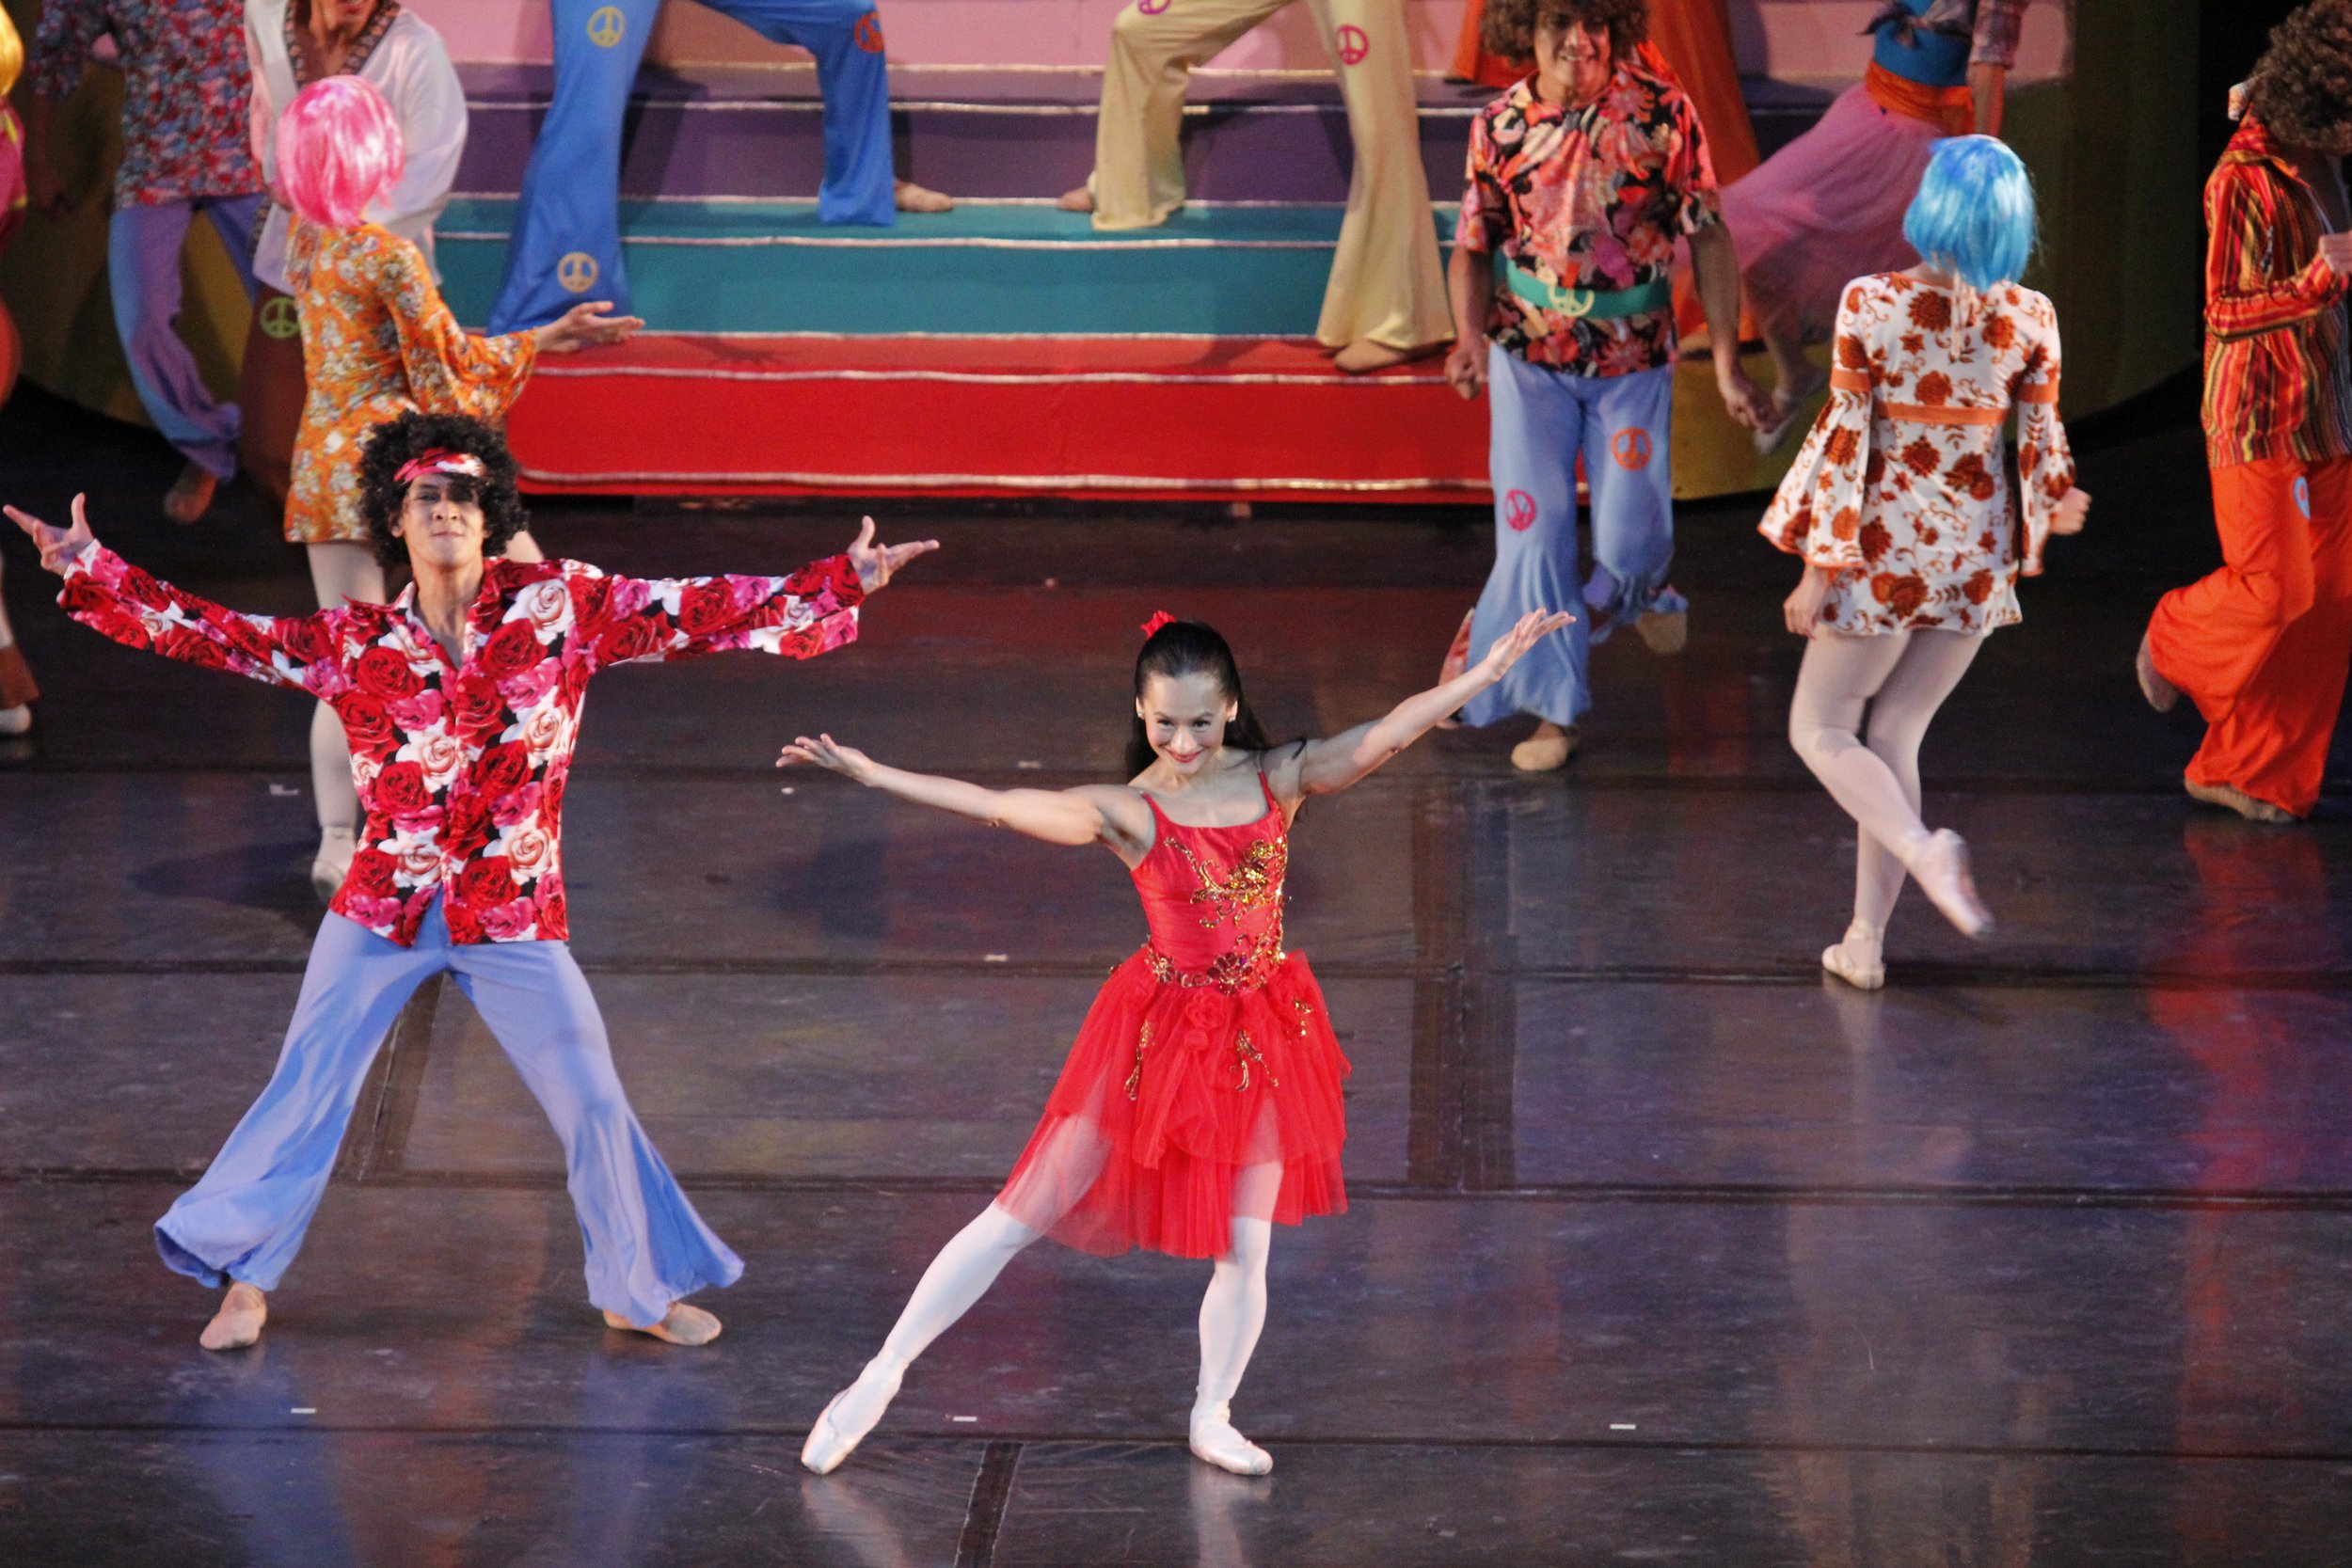    Lisa Macuja-Elizalde and Rudy De Dios channel a groovy vibe – he in red floral top and denim bell-bottoms and she in a red tutu with glittery accents – as they dance to the Mamma Mia Medley in  Ballet &amp; Ballads  (2013). Made up of ABBA hits, t